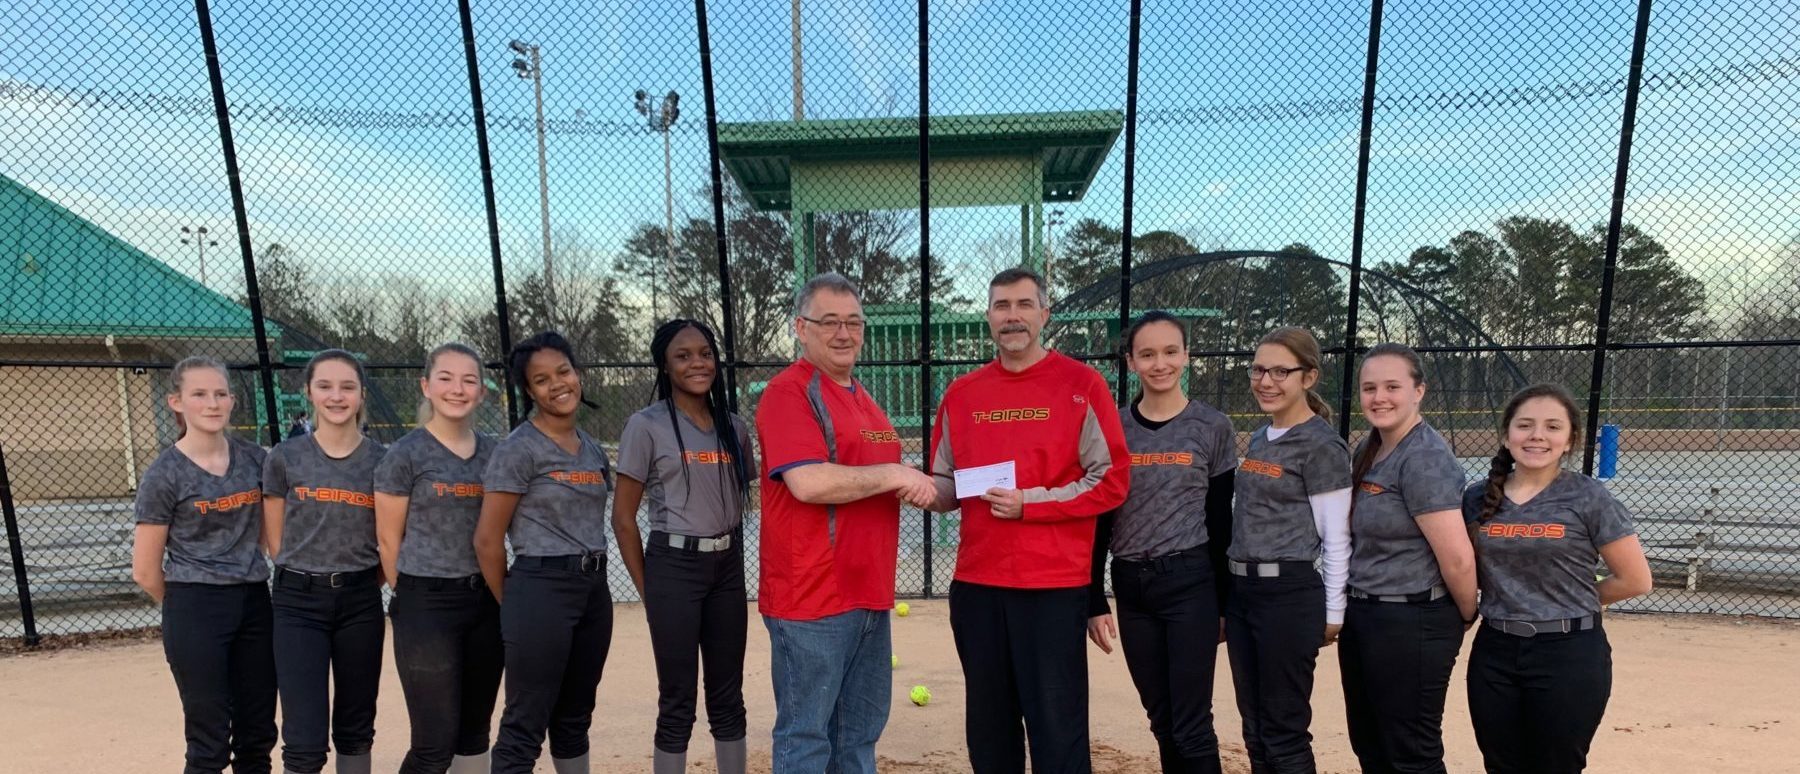 Picture of a women's softball team standing in a line with two coaches at the center shaking hands and holding a check